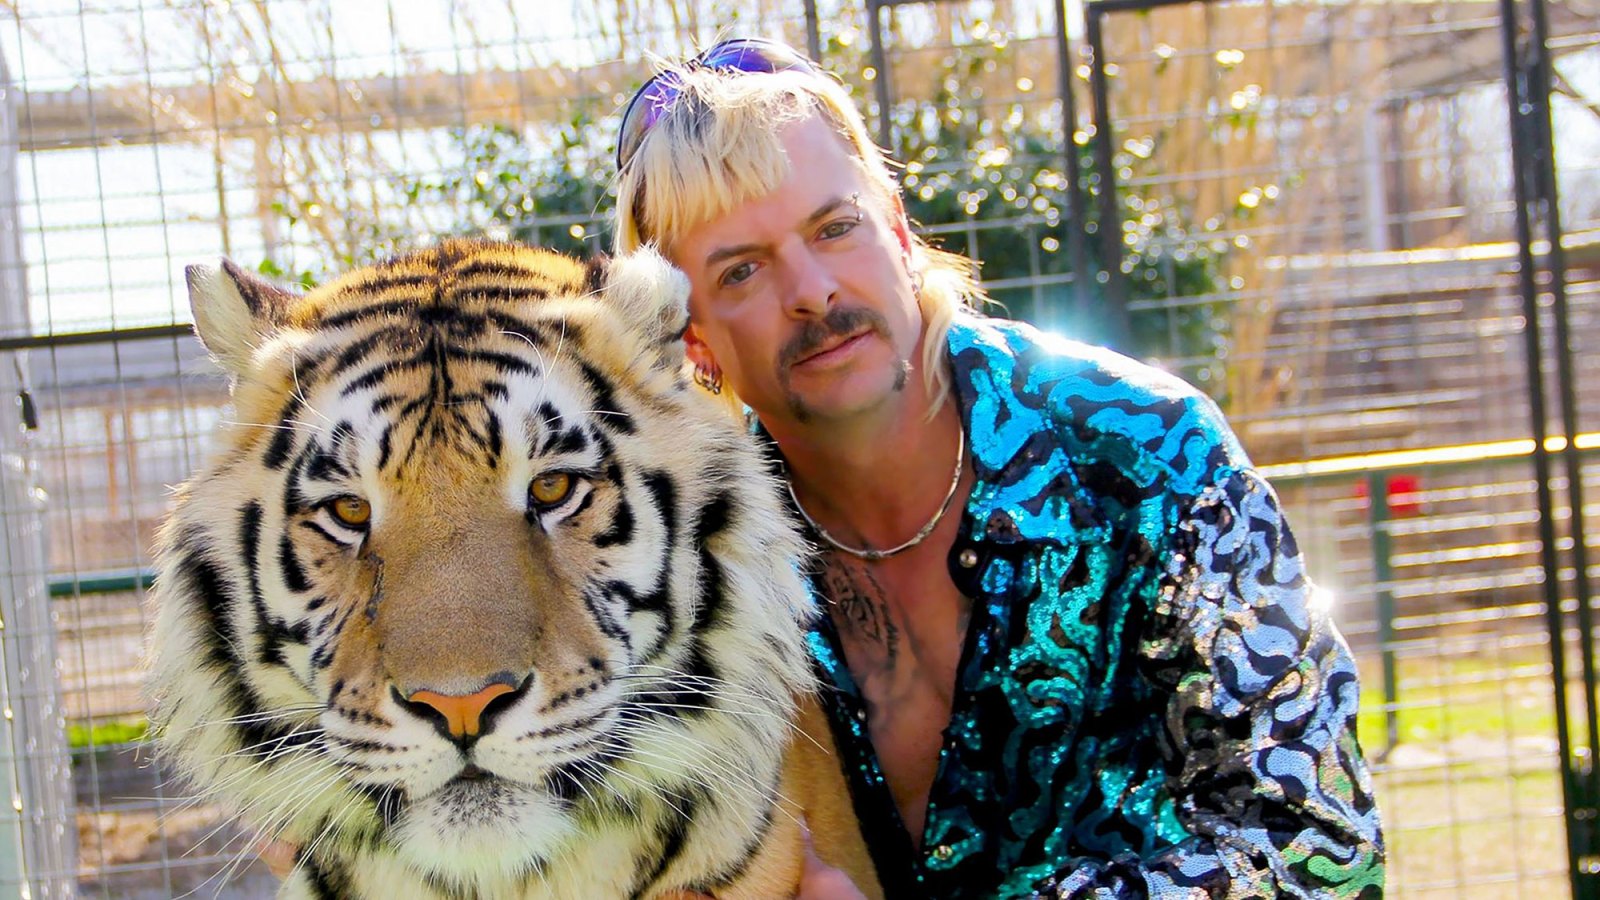 Tiger King's Joe Exotic Requests Prison Release Following 'Aggressive' Cancer Diagnosis